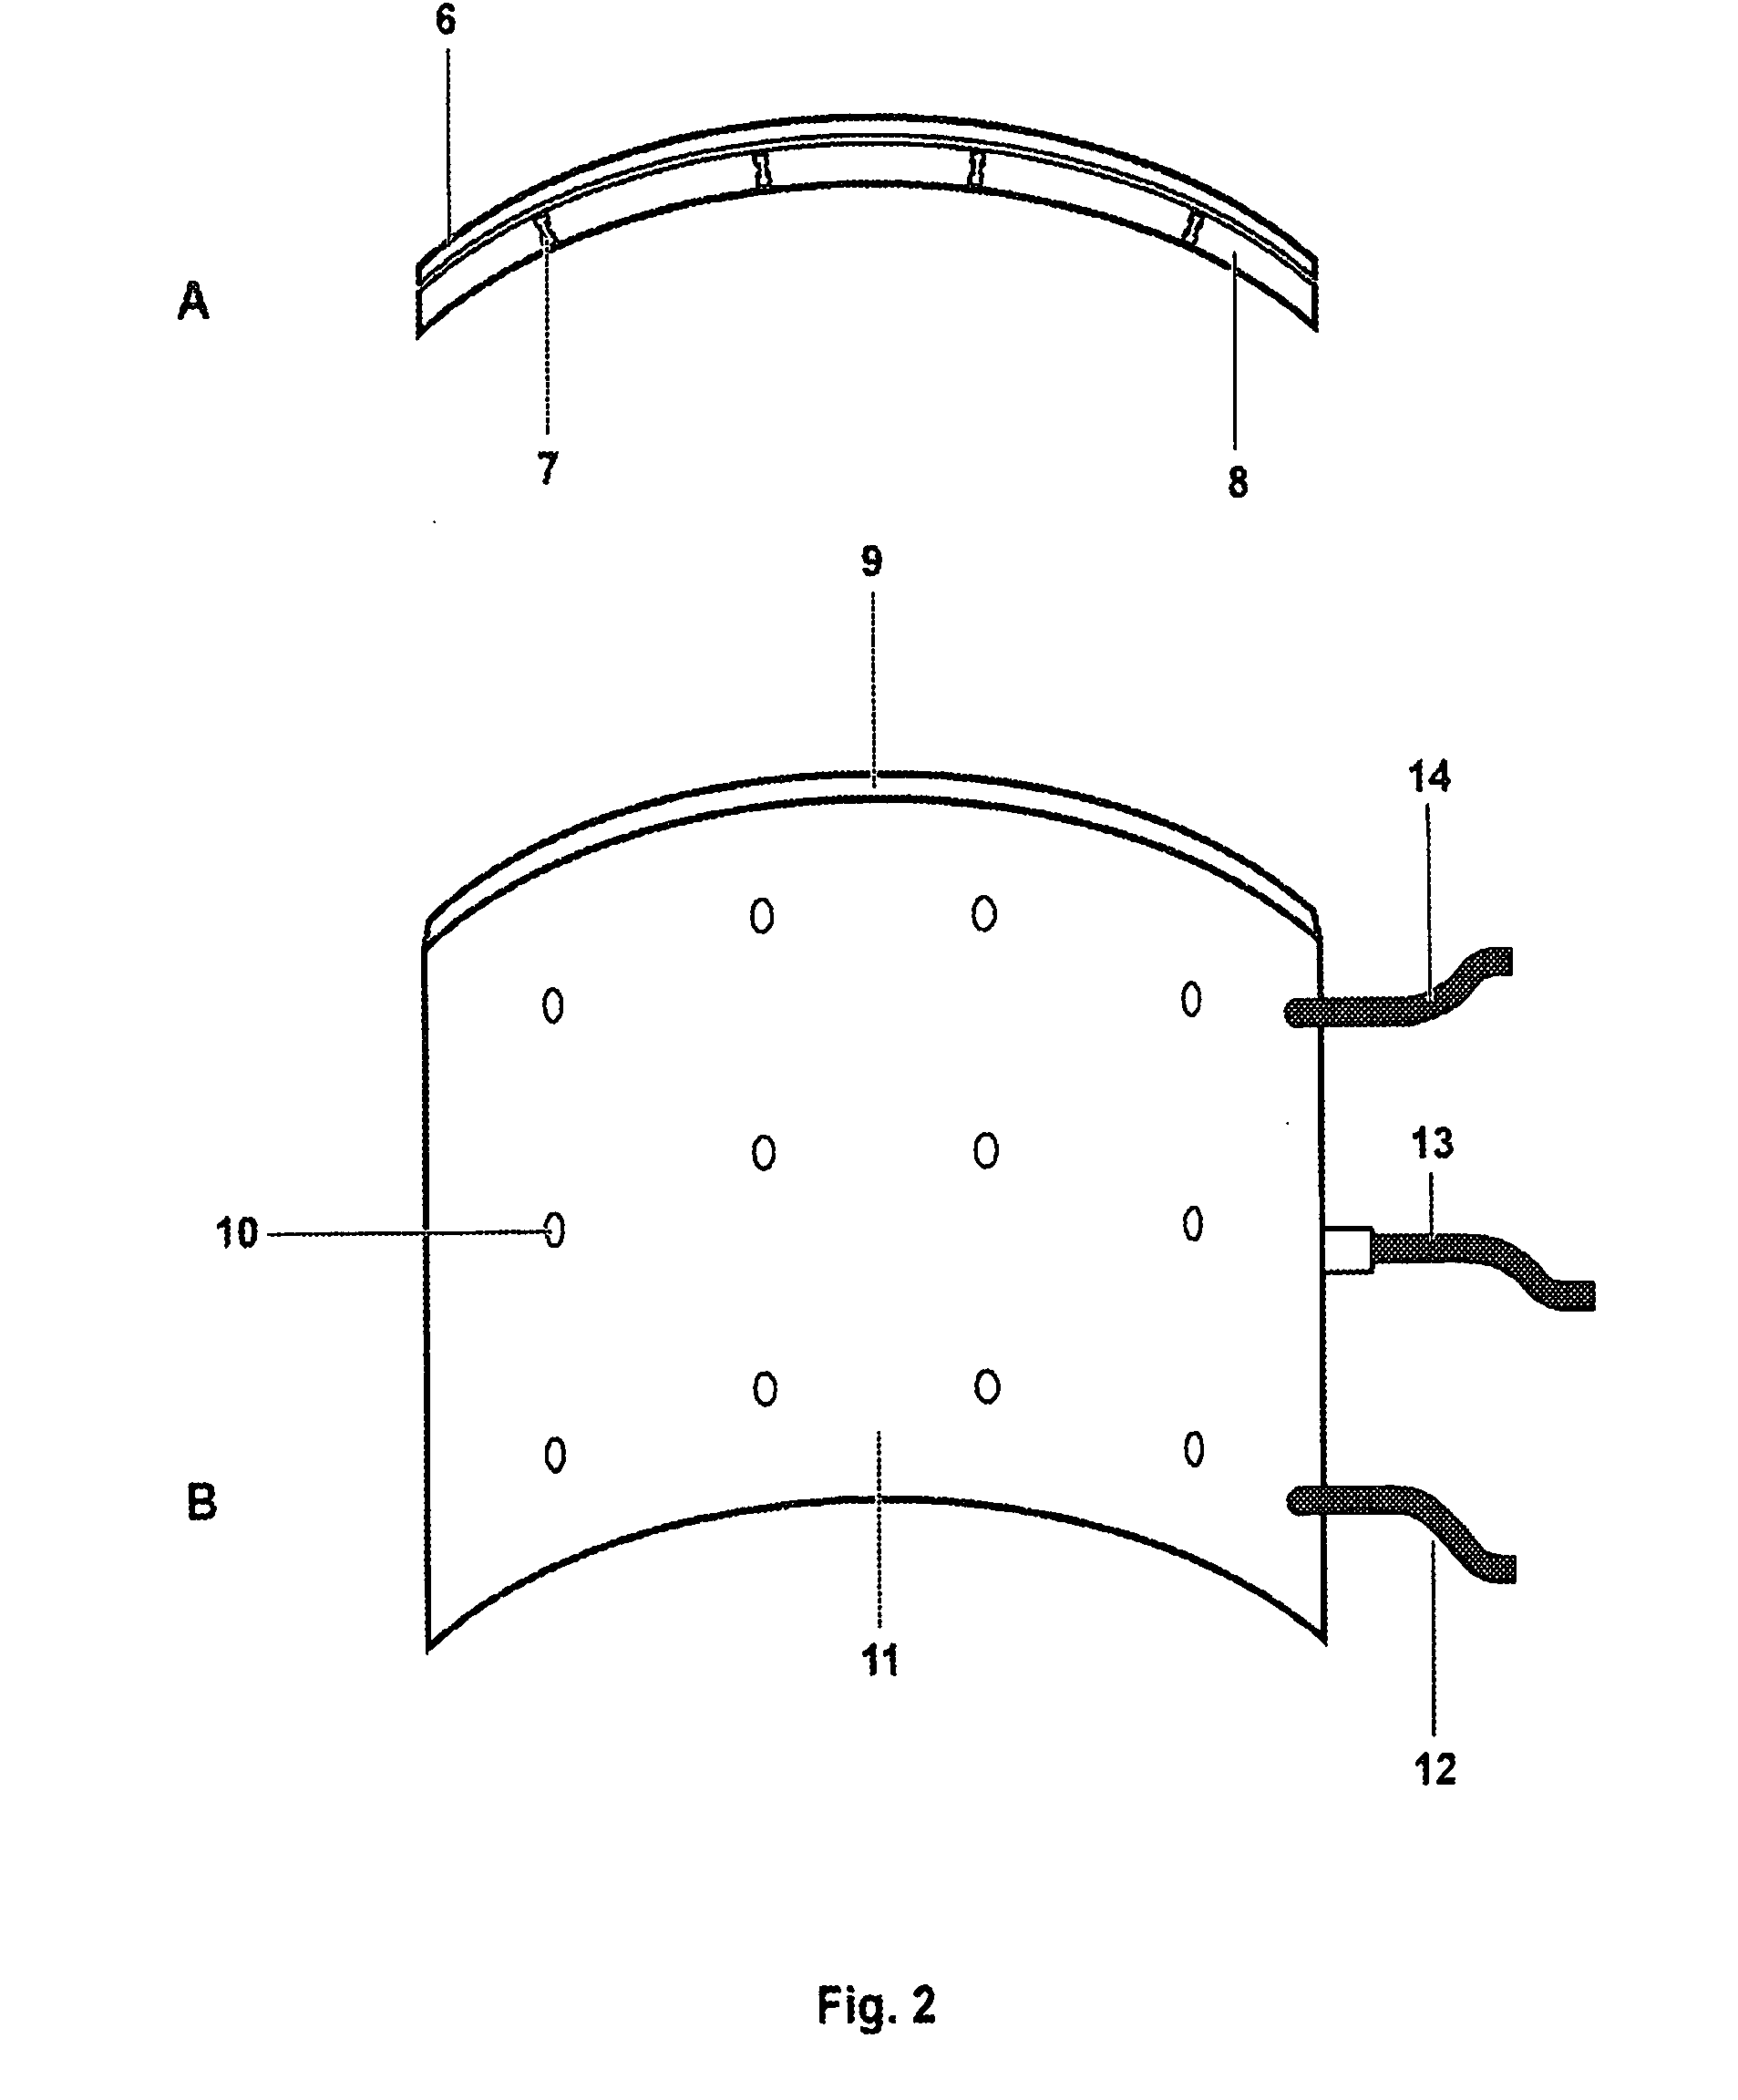 Microwave devices for treating biological samples and tissue and methods for using same